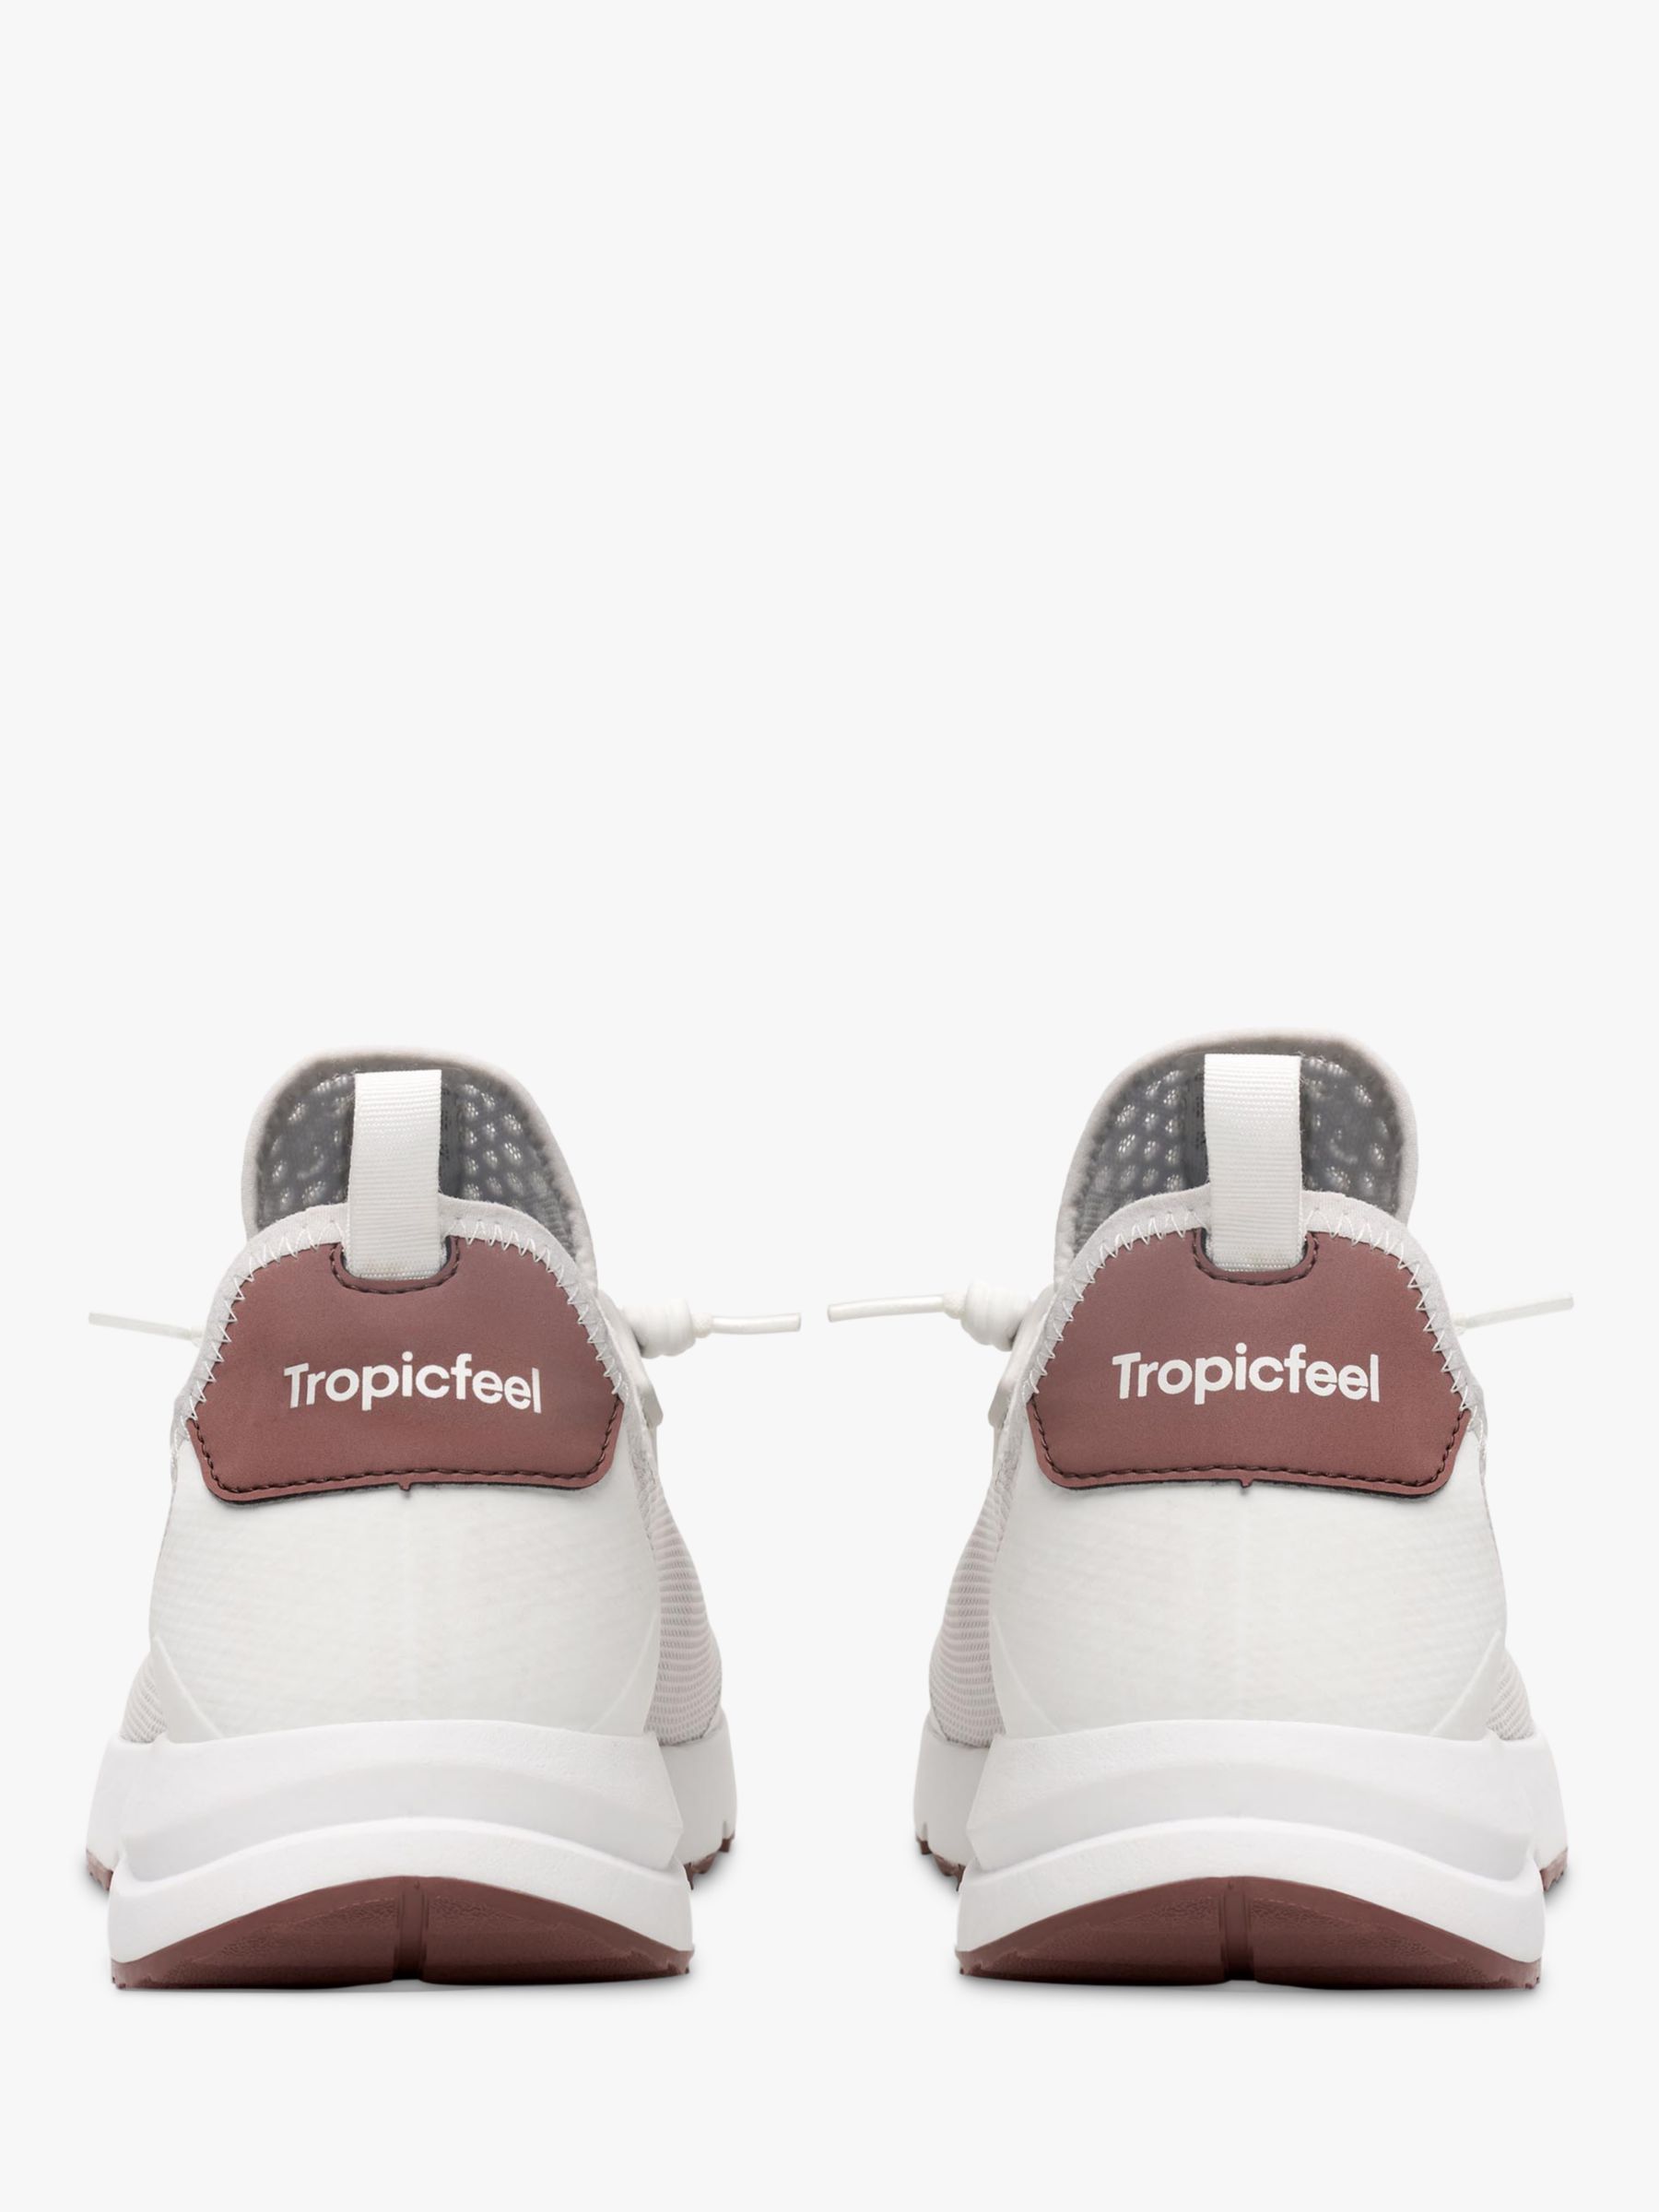 Buy Tropicfeel All-Terrain Lite Recycled Trainers Online at johnlewis.com